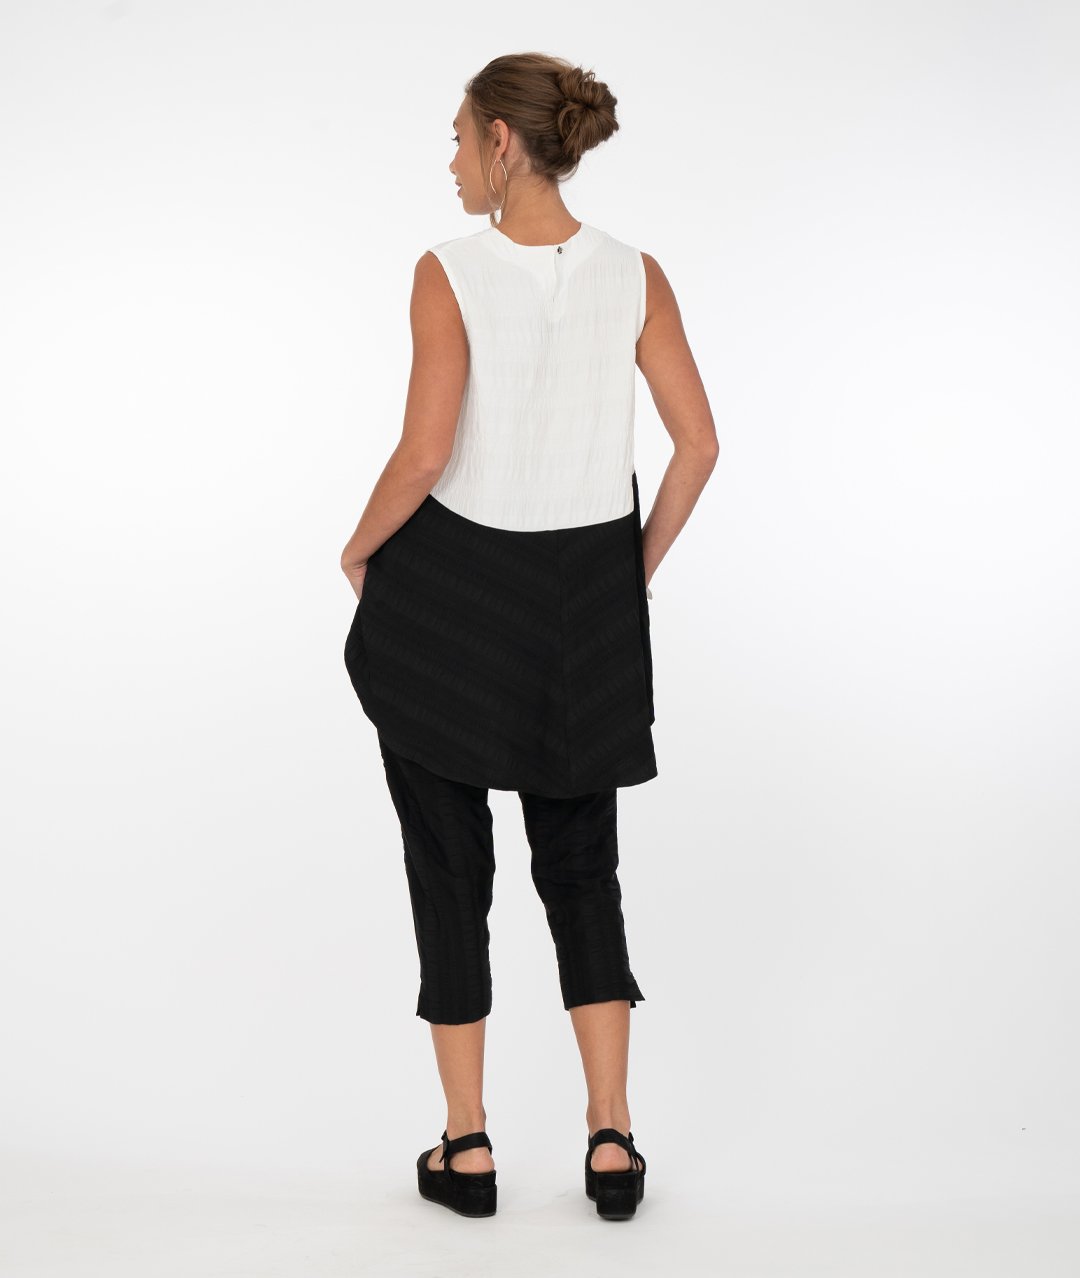 a brunette model wearing black capri pants with a black and white tank top in front of a white background